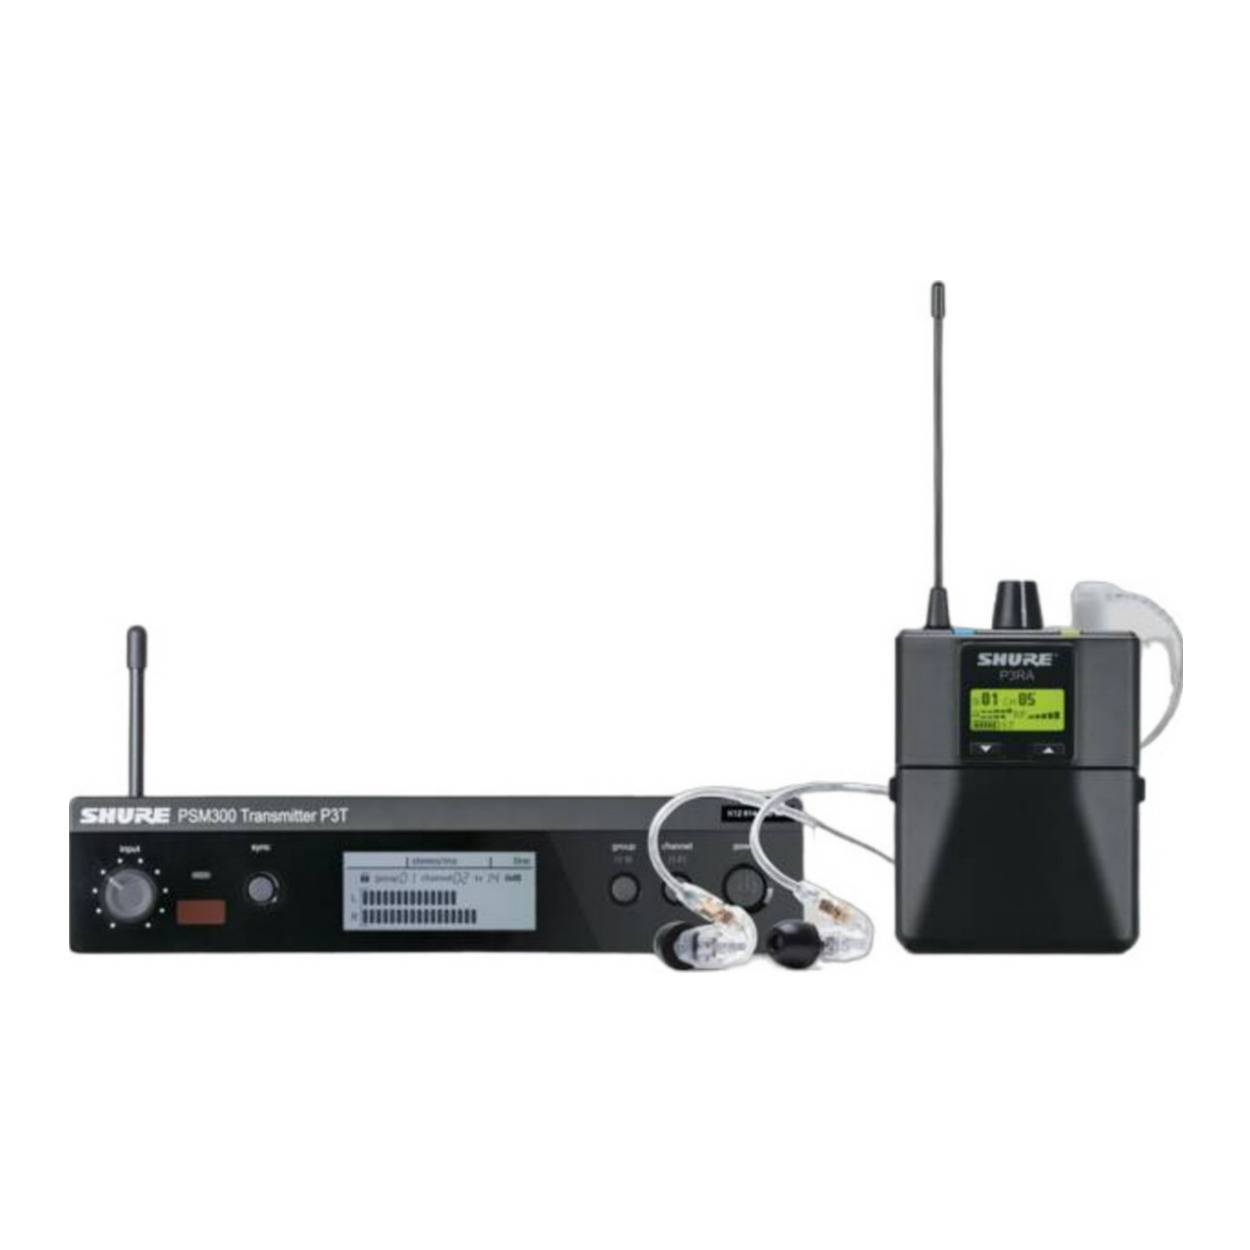 Shure P3TRA215CL PSM300 Wireless In-Ear Monitor System with SE215-CL Earphones and H20 Band